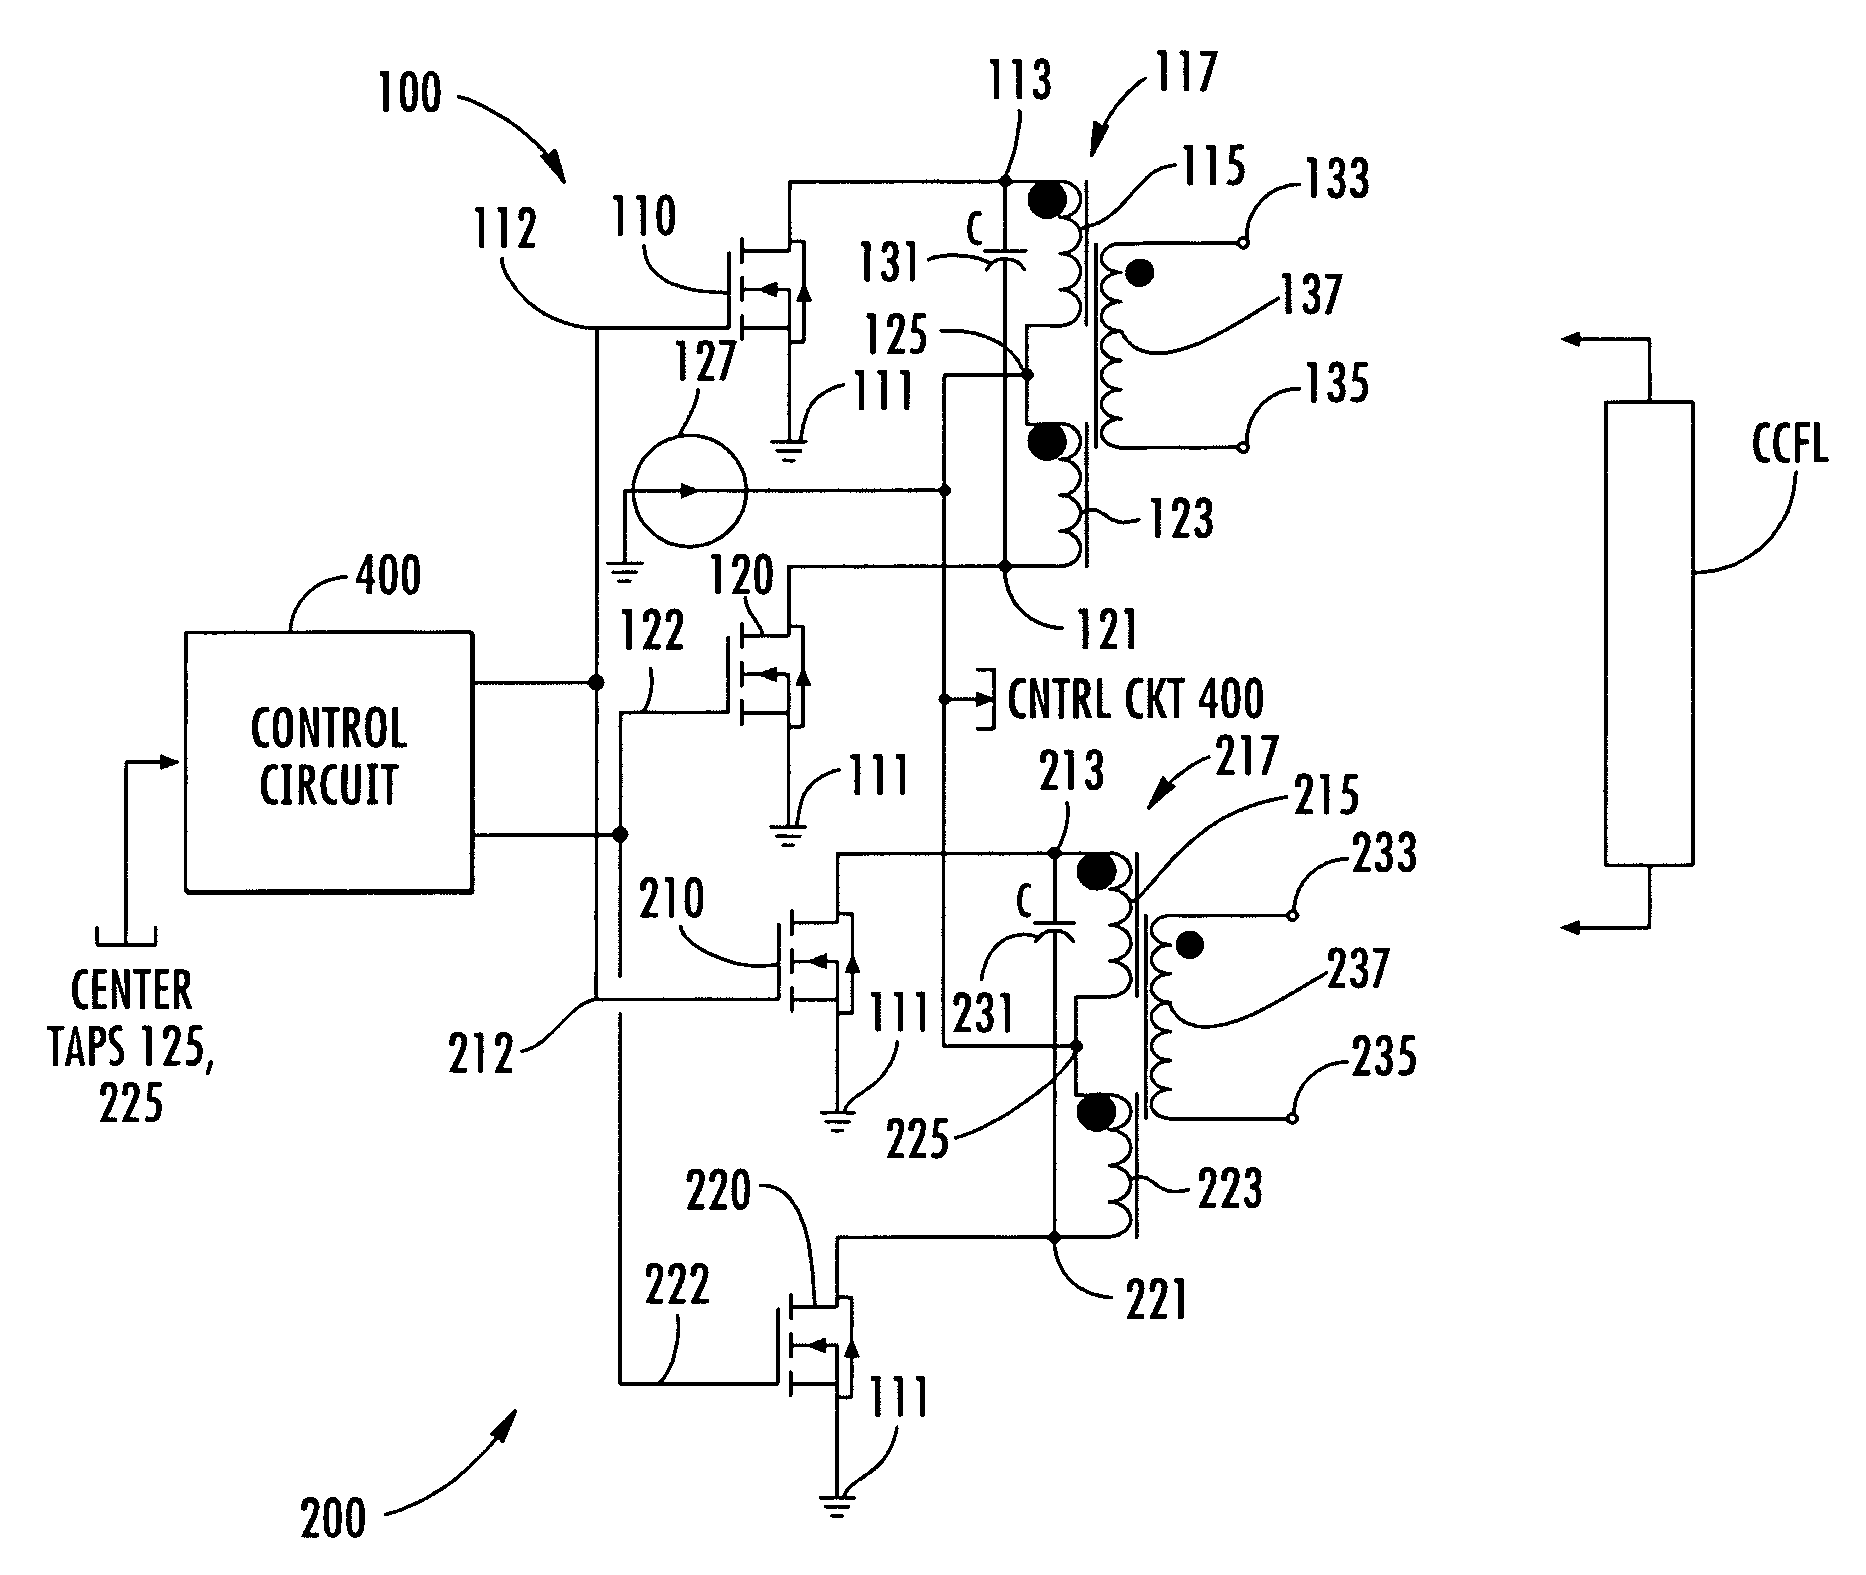 Architecture for achieving resonant circuit synchronization of multiple zero voltage switched push-pull DC-AC converters